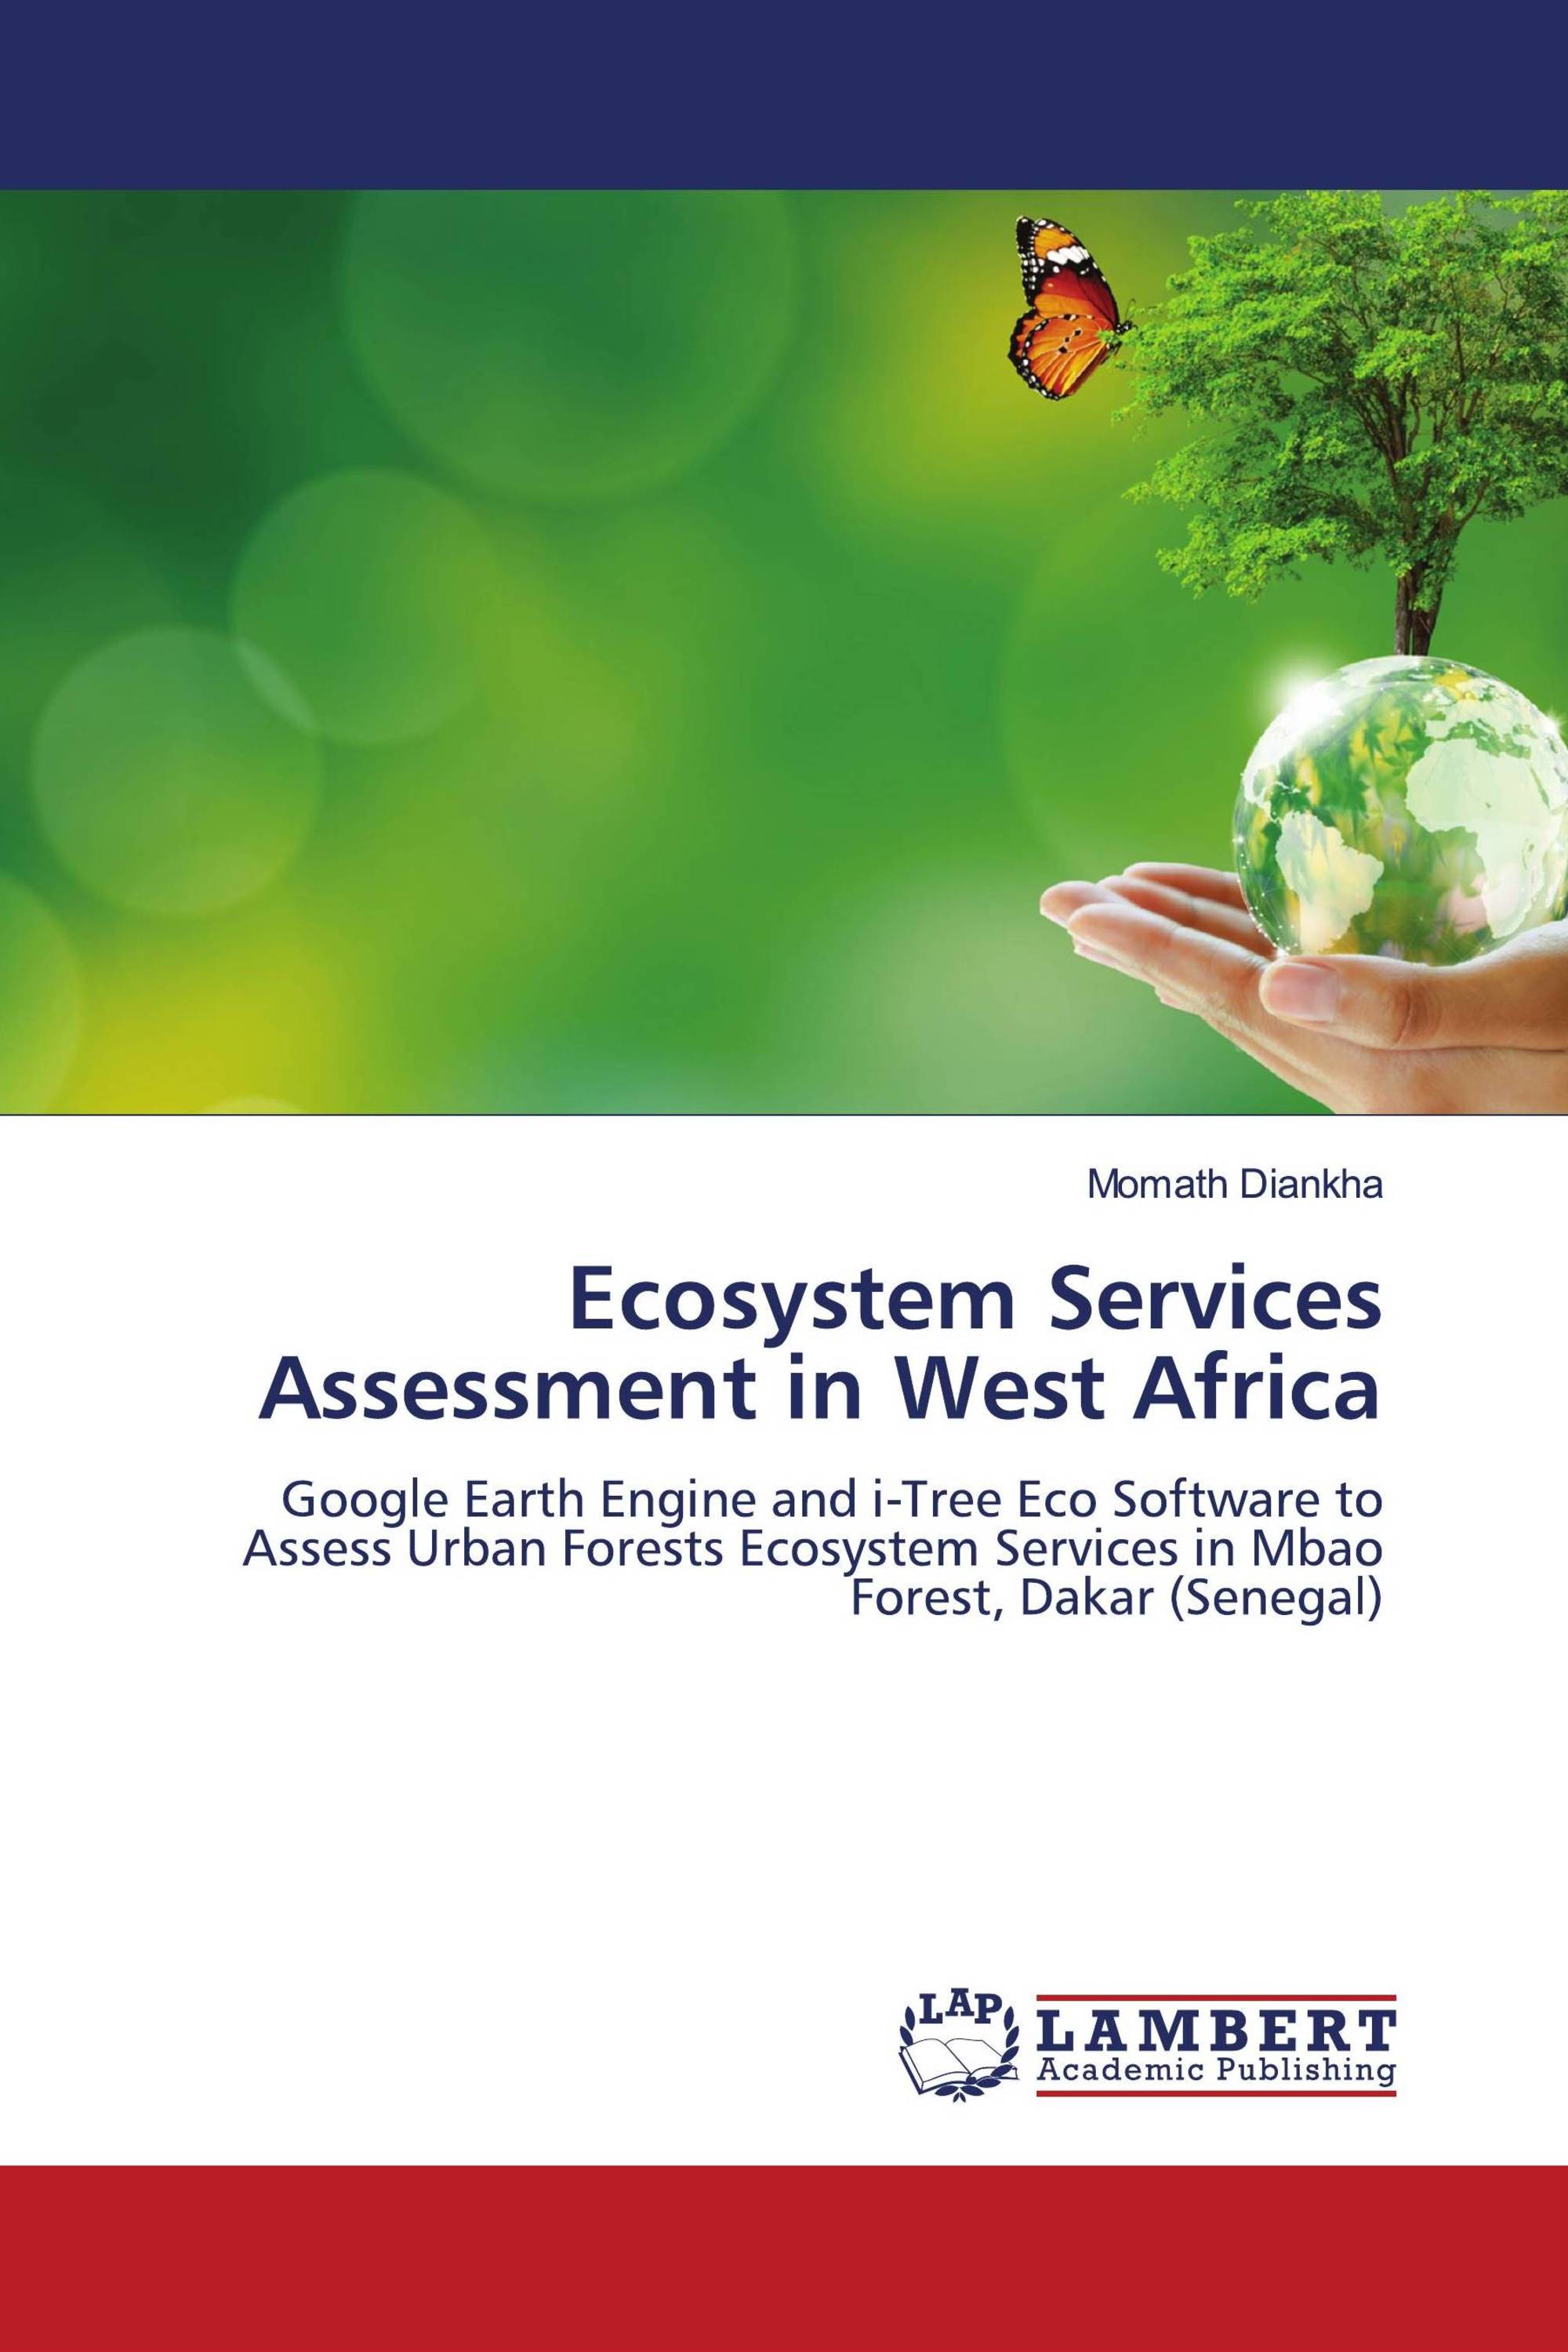 Ecosystem Services Assessment in West Africa